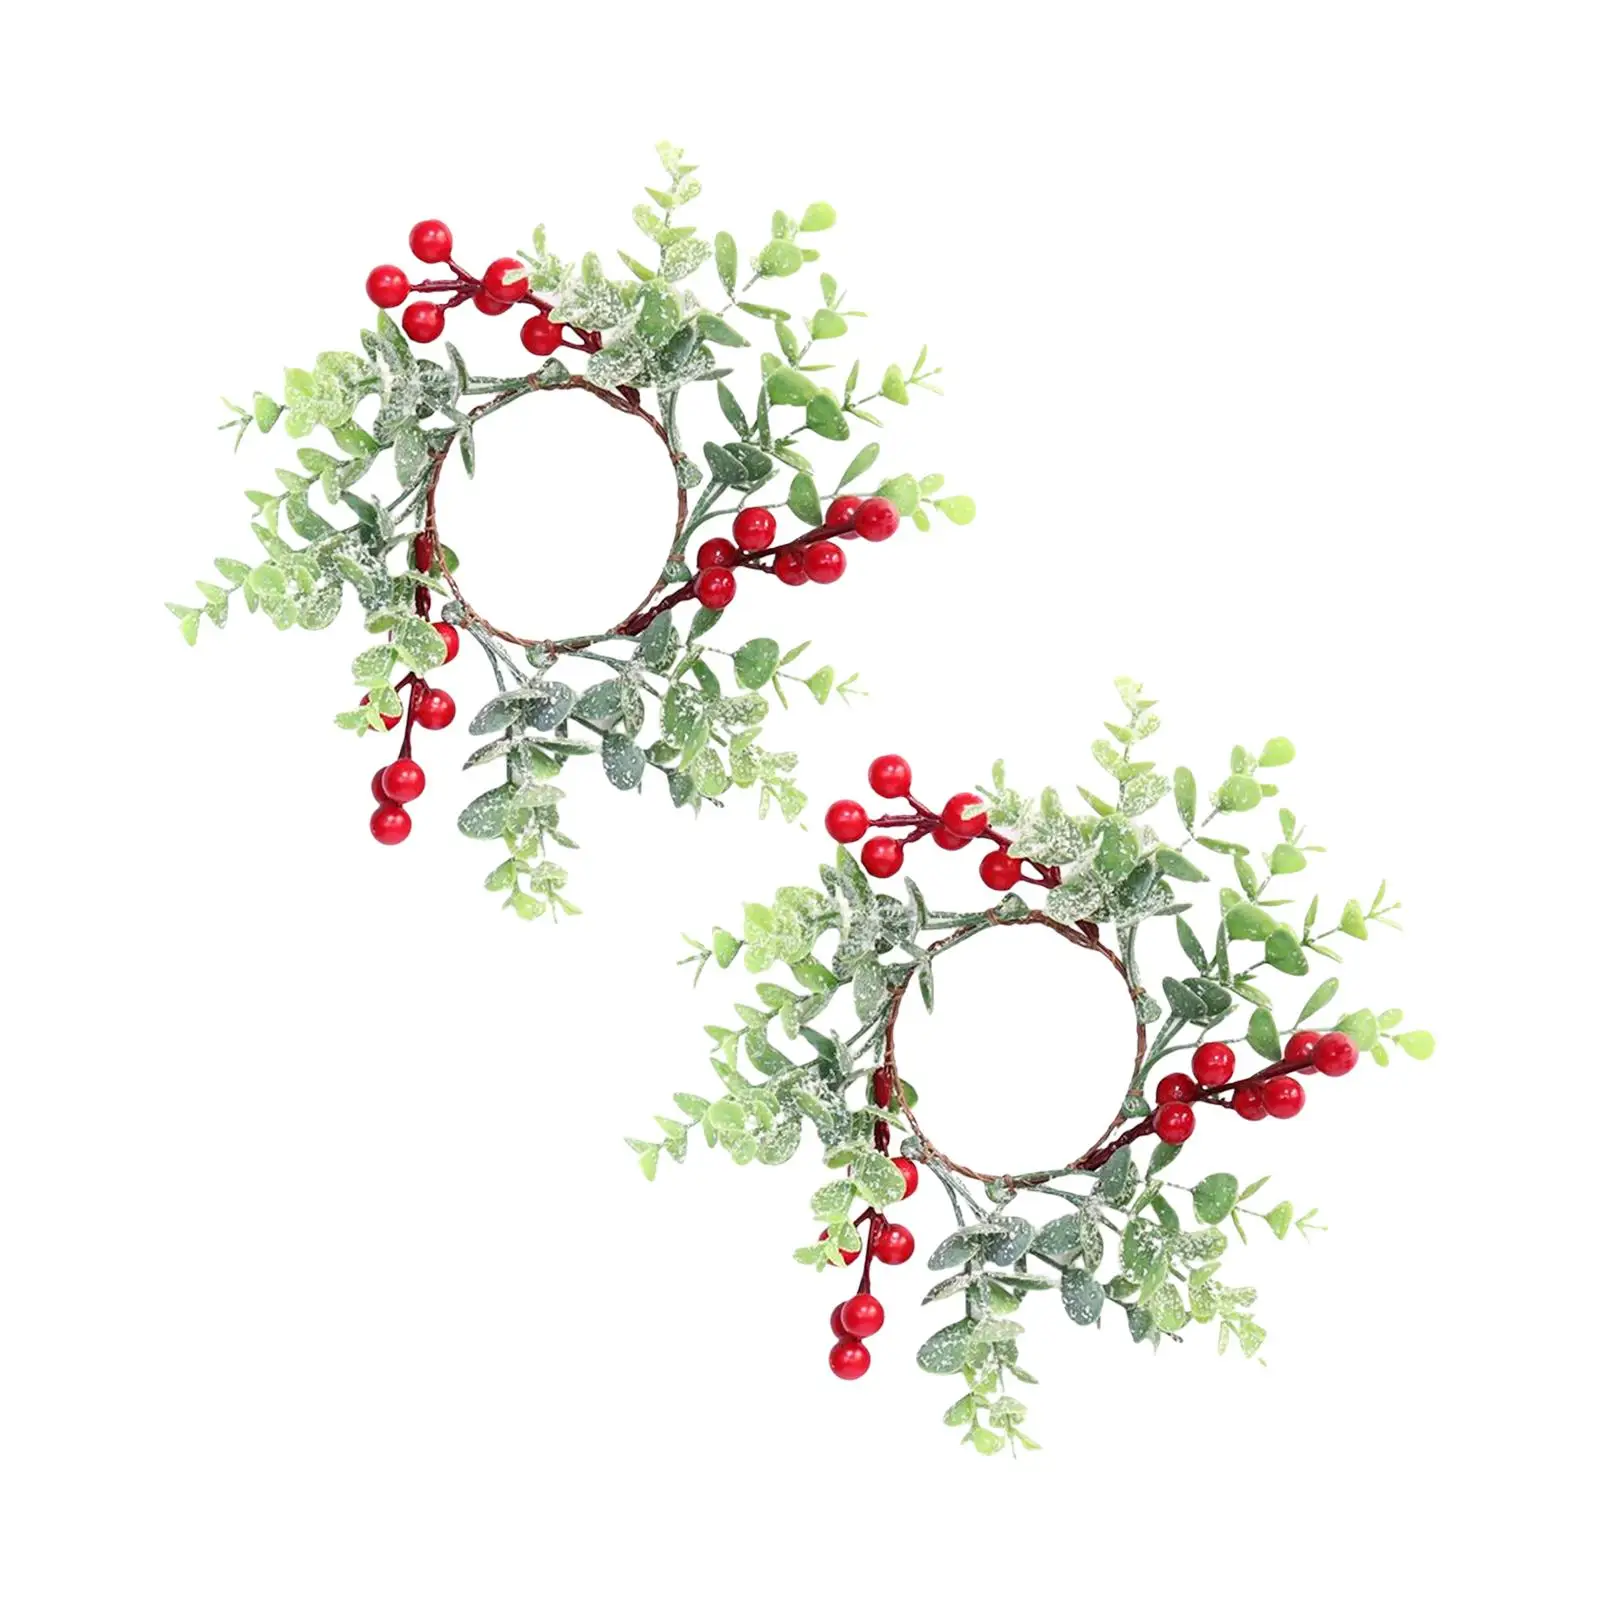 2 Pieces Easter Candle Rings Red Berries Garland Candles Base Holder Rustic Wreath for Decor Holiday Gift Festivals